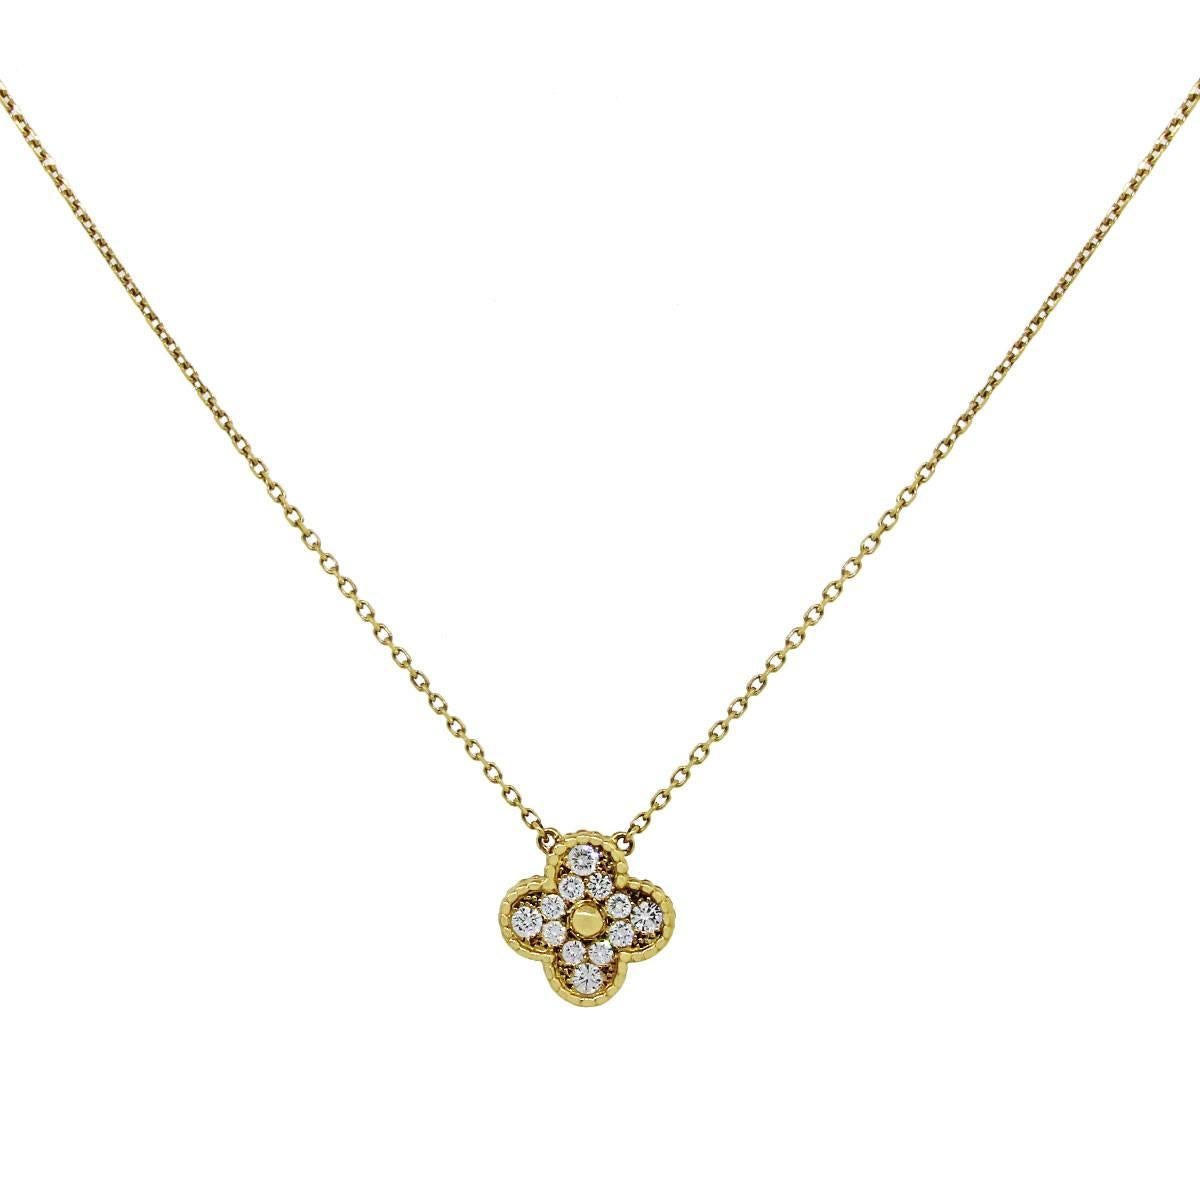 Brand: Van Cleef & Arpels
Material: 18k yellow gold
Diamond details: Approximately 0.48ctw of round brilliant diamonds. Diamonds are DEF in color and IF-VVS in clarity.
Total Weight: 5.2g (3.4dwt)
Necklace Length: 16″ in length
Pendant Measurements: